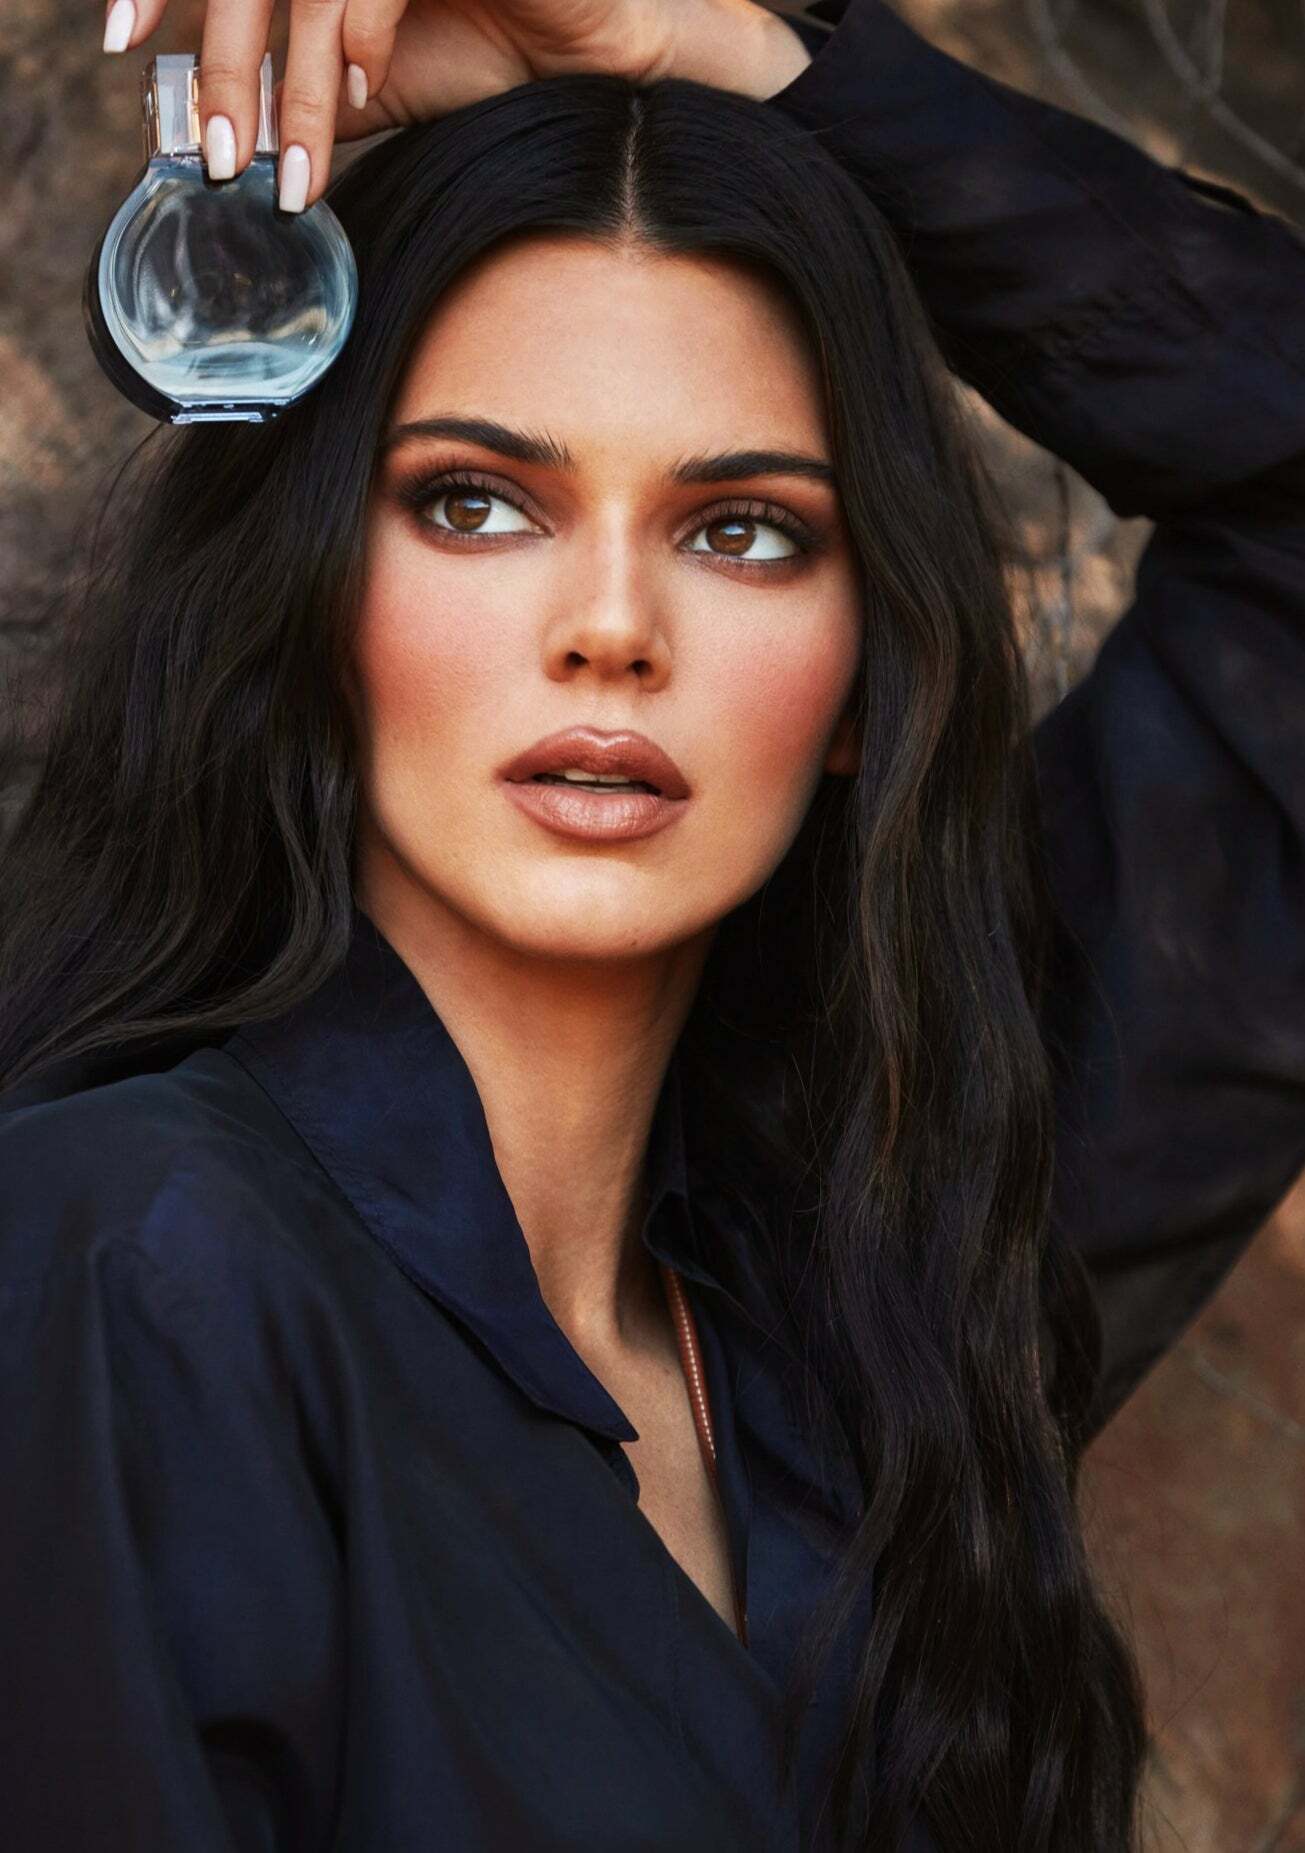 No Doubt. Kendall Jenner's Face Is Genuine Bukkake Material. I'd Still Make Out With Her After That.